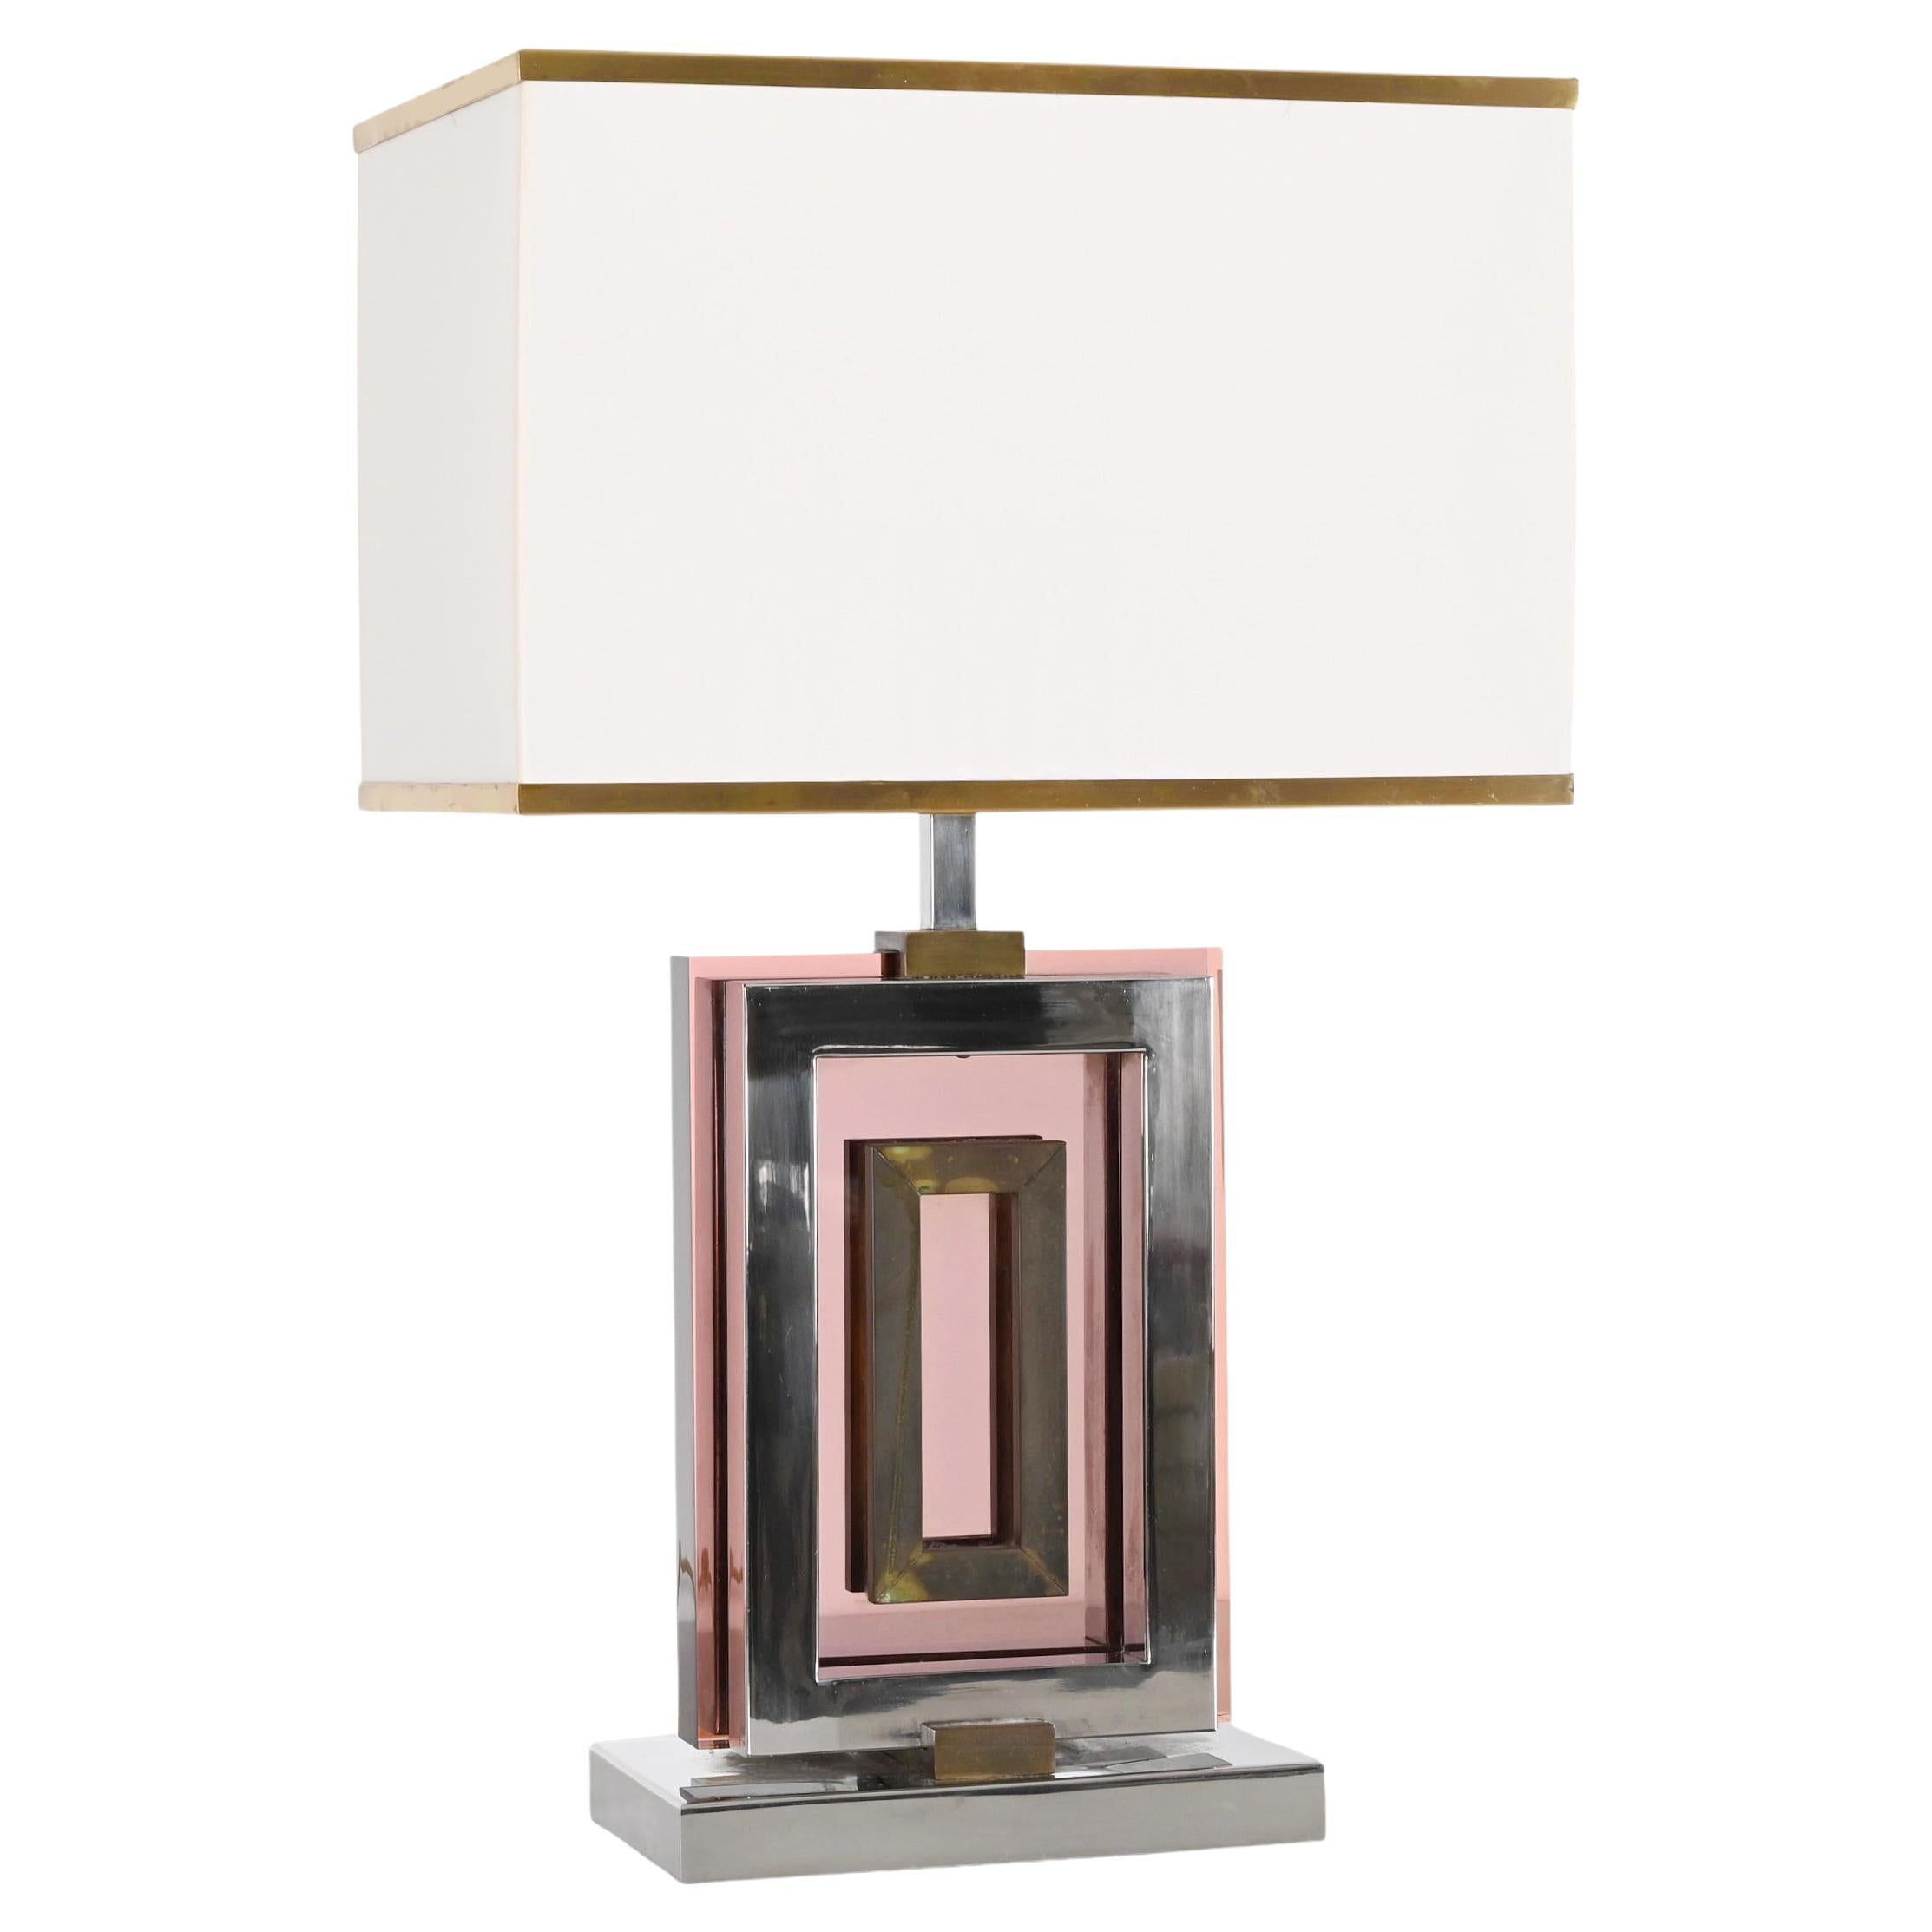 Midcentury Table Lamp by Romeo Rega in Lucite, Chrome and Brass, Italy 1970s For Sale